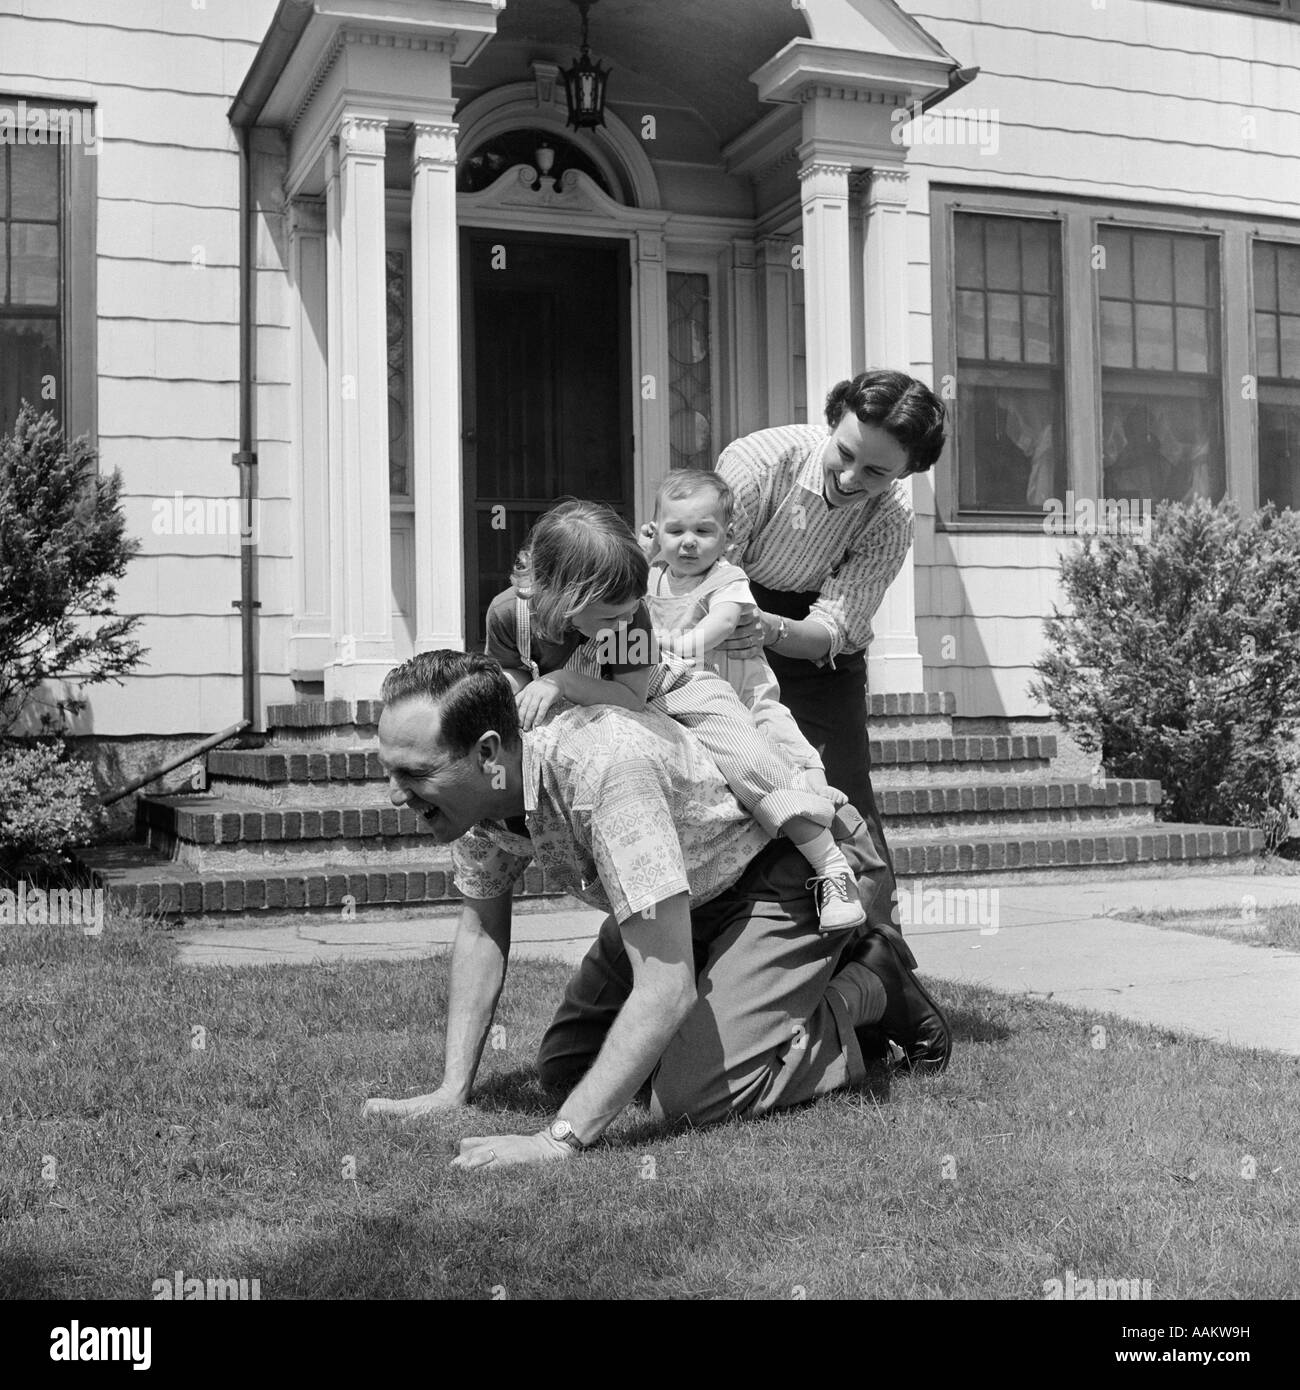 1950s FAMILY FRONT LAWN HOUSE TWO KIDS RIDING FATHER PIGGYBACK MOTHER HELPING TODDLER BABY Stock Photo